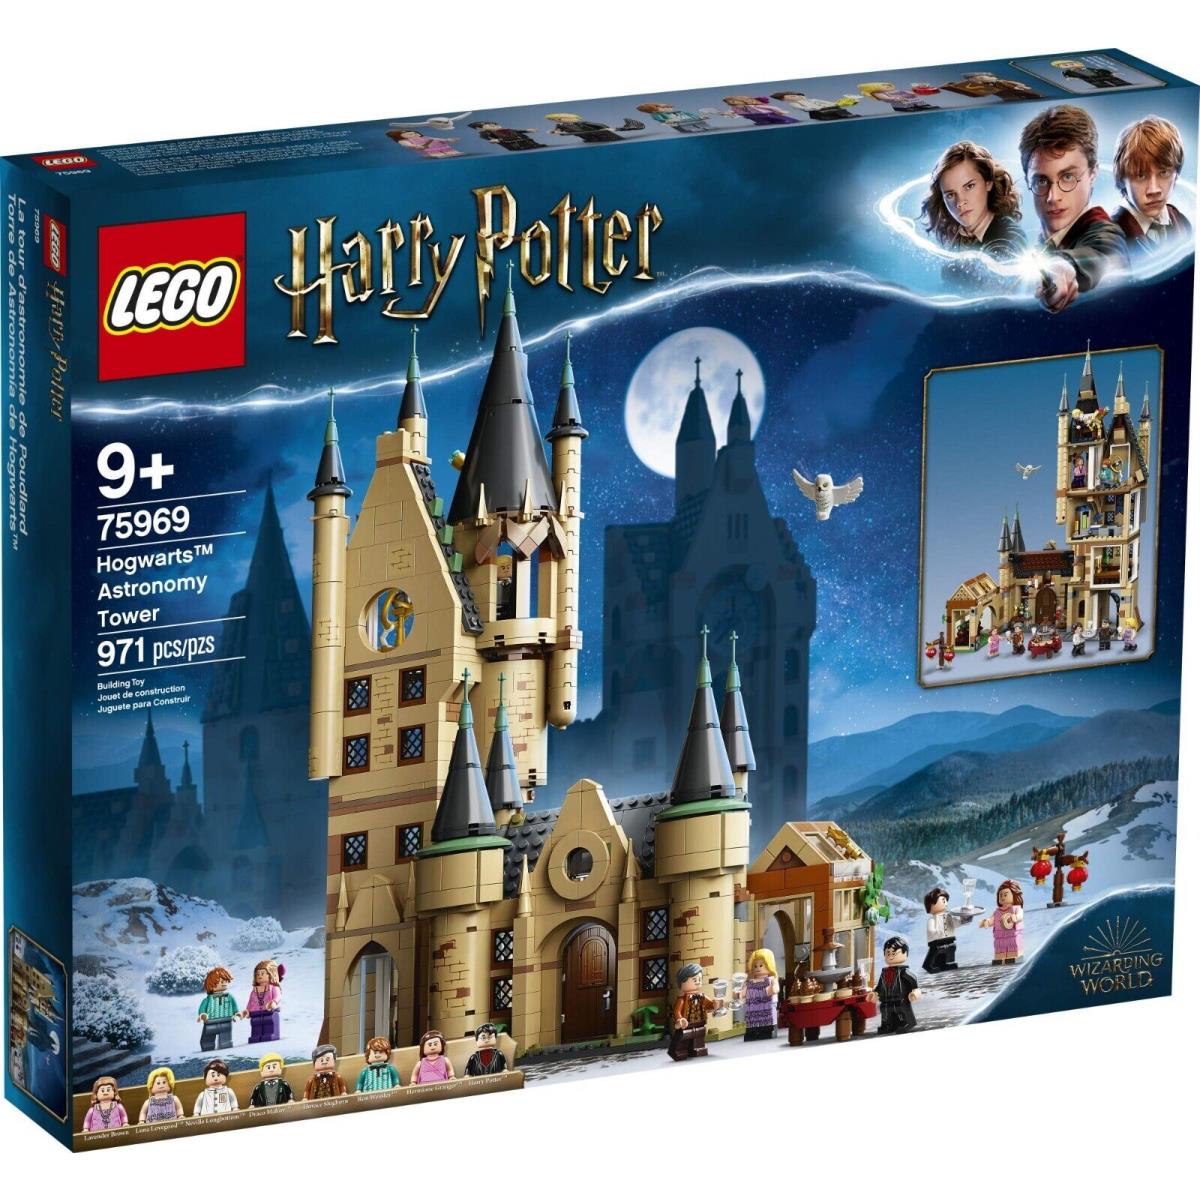 Lego Harry Potter Astronomy Tower 75969 See Description